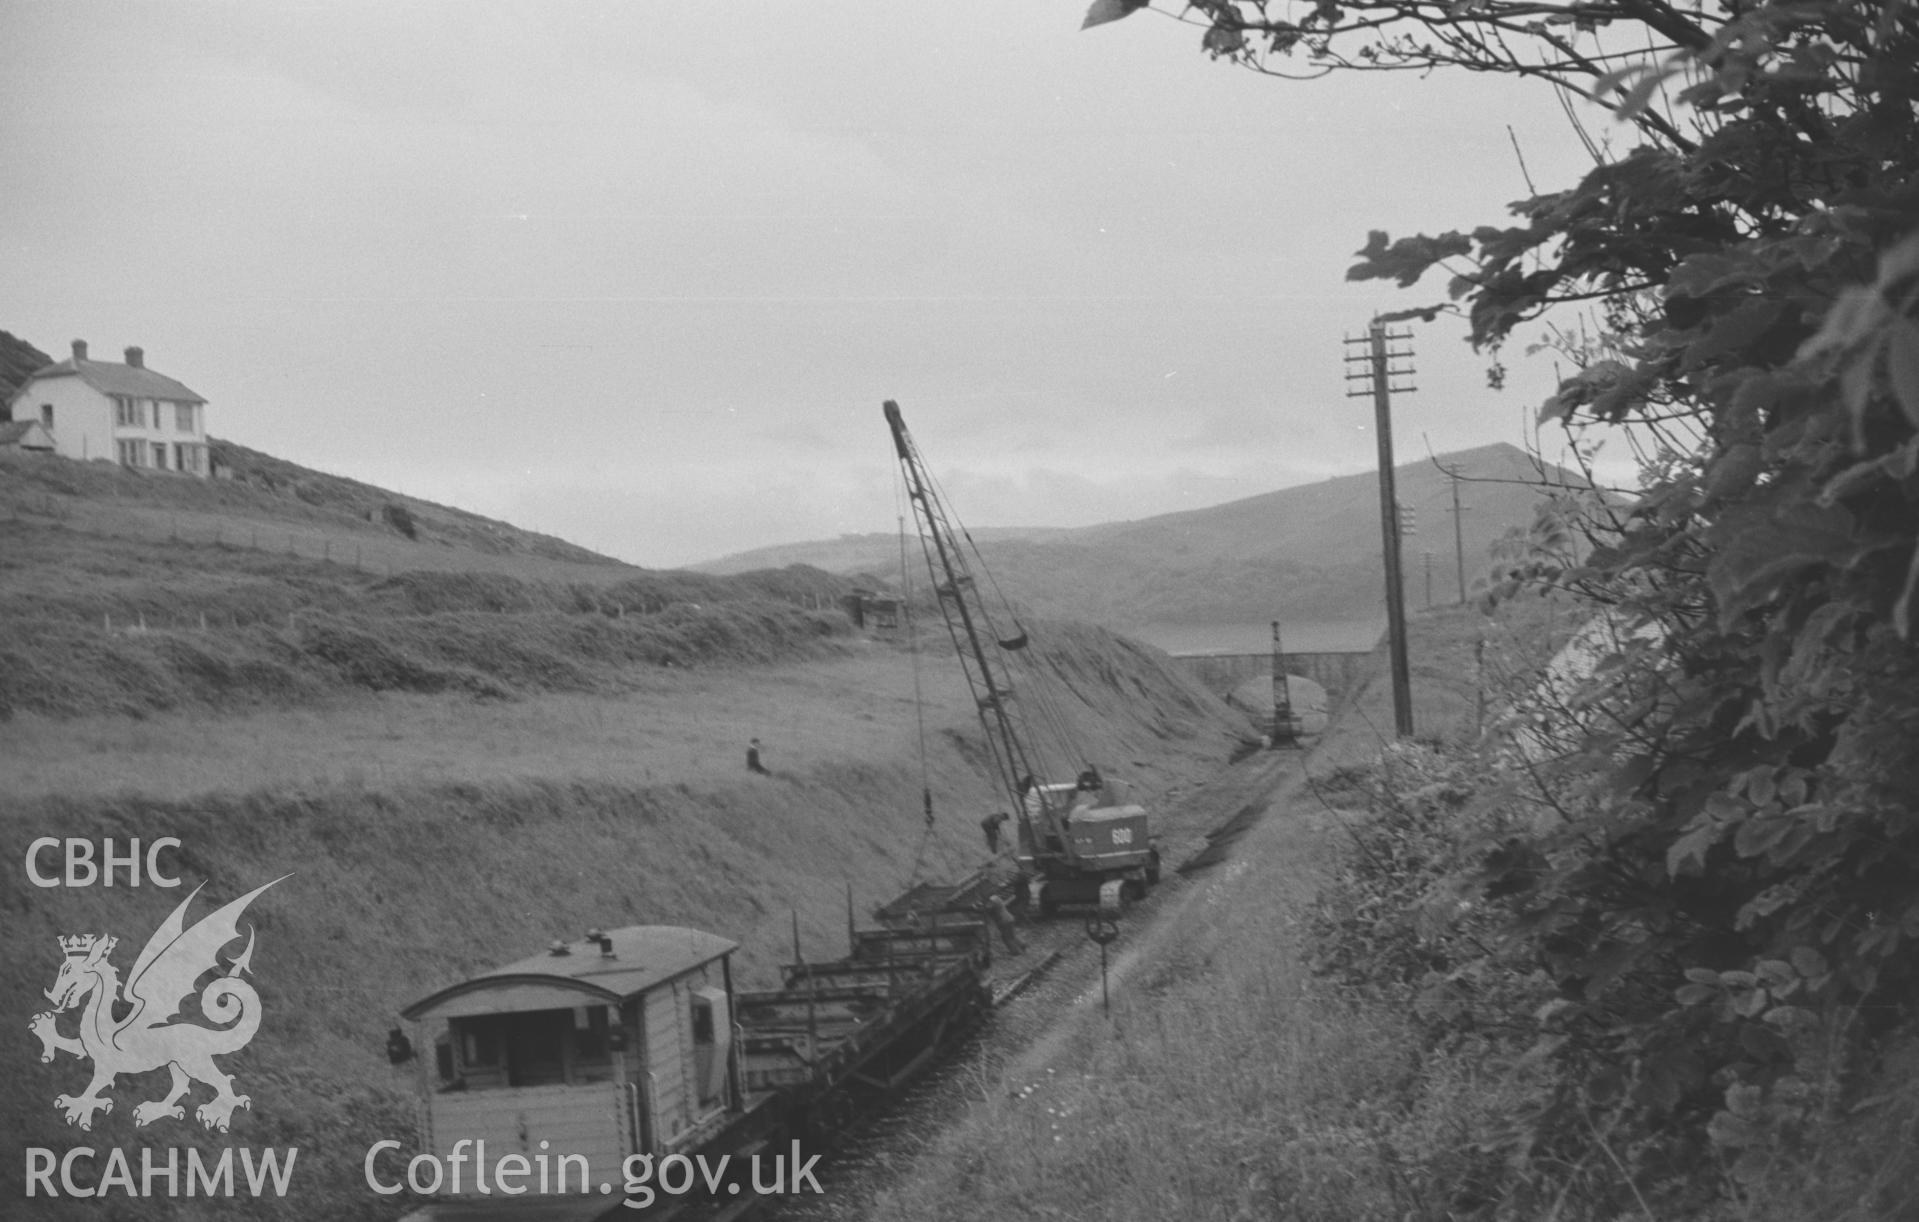 Digital copy of a black and white negative showing the dismantling of the railway at Tanybwlch, near Aberystwyth. Photographed by Arthur O. Chater in June 1966.